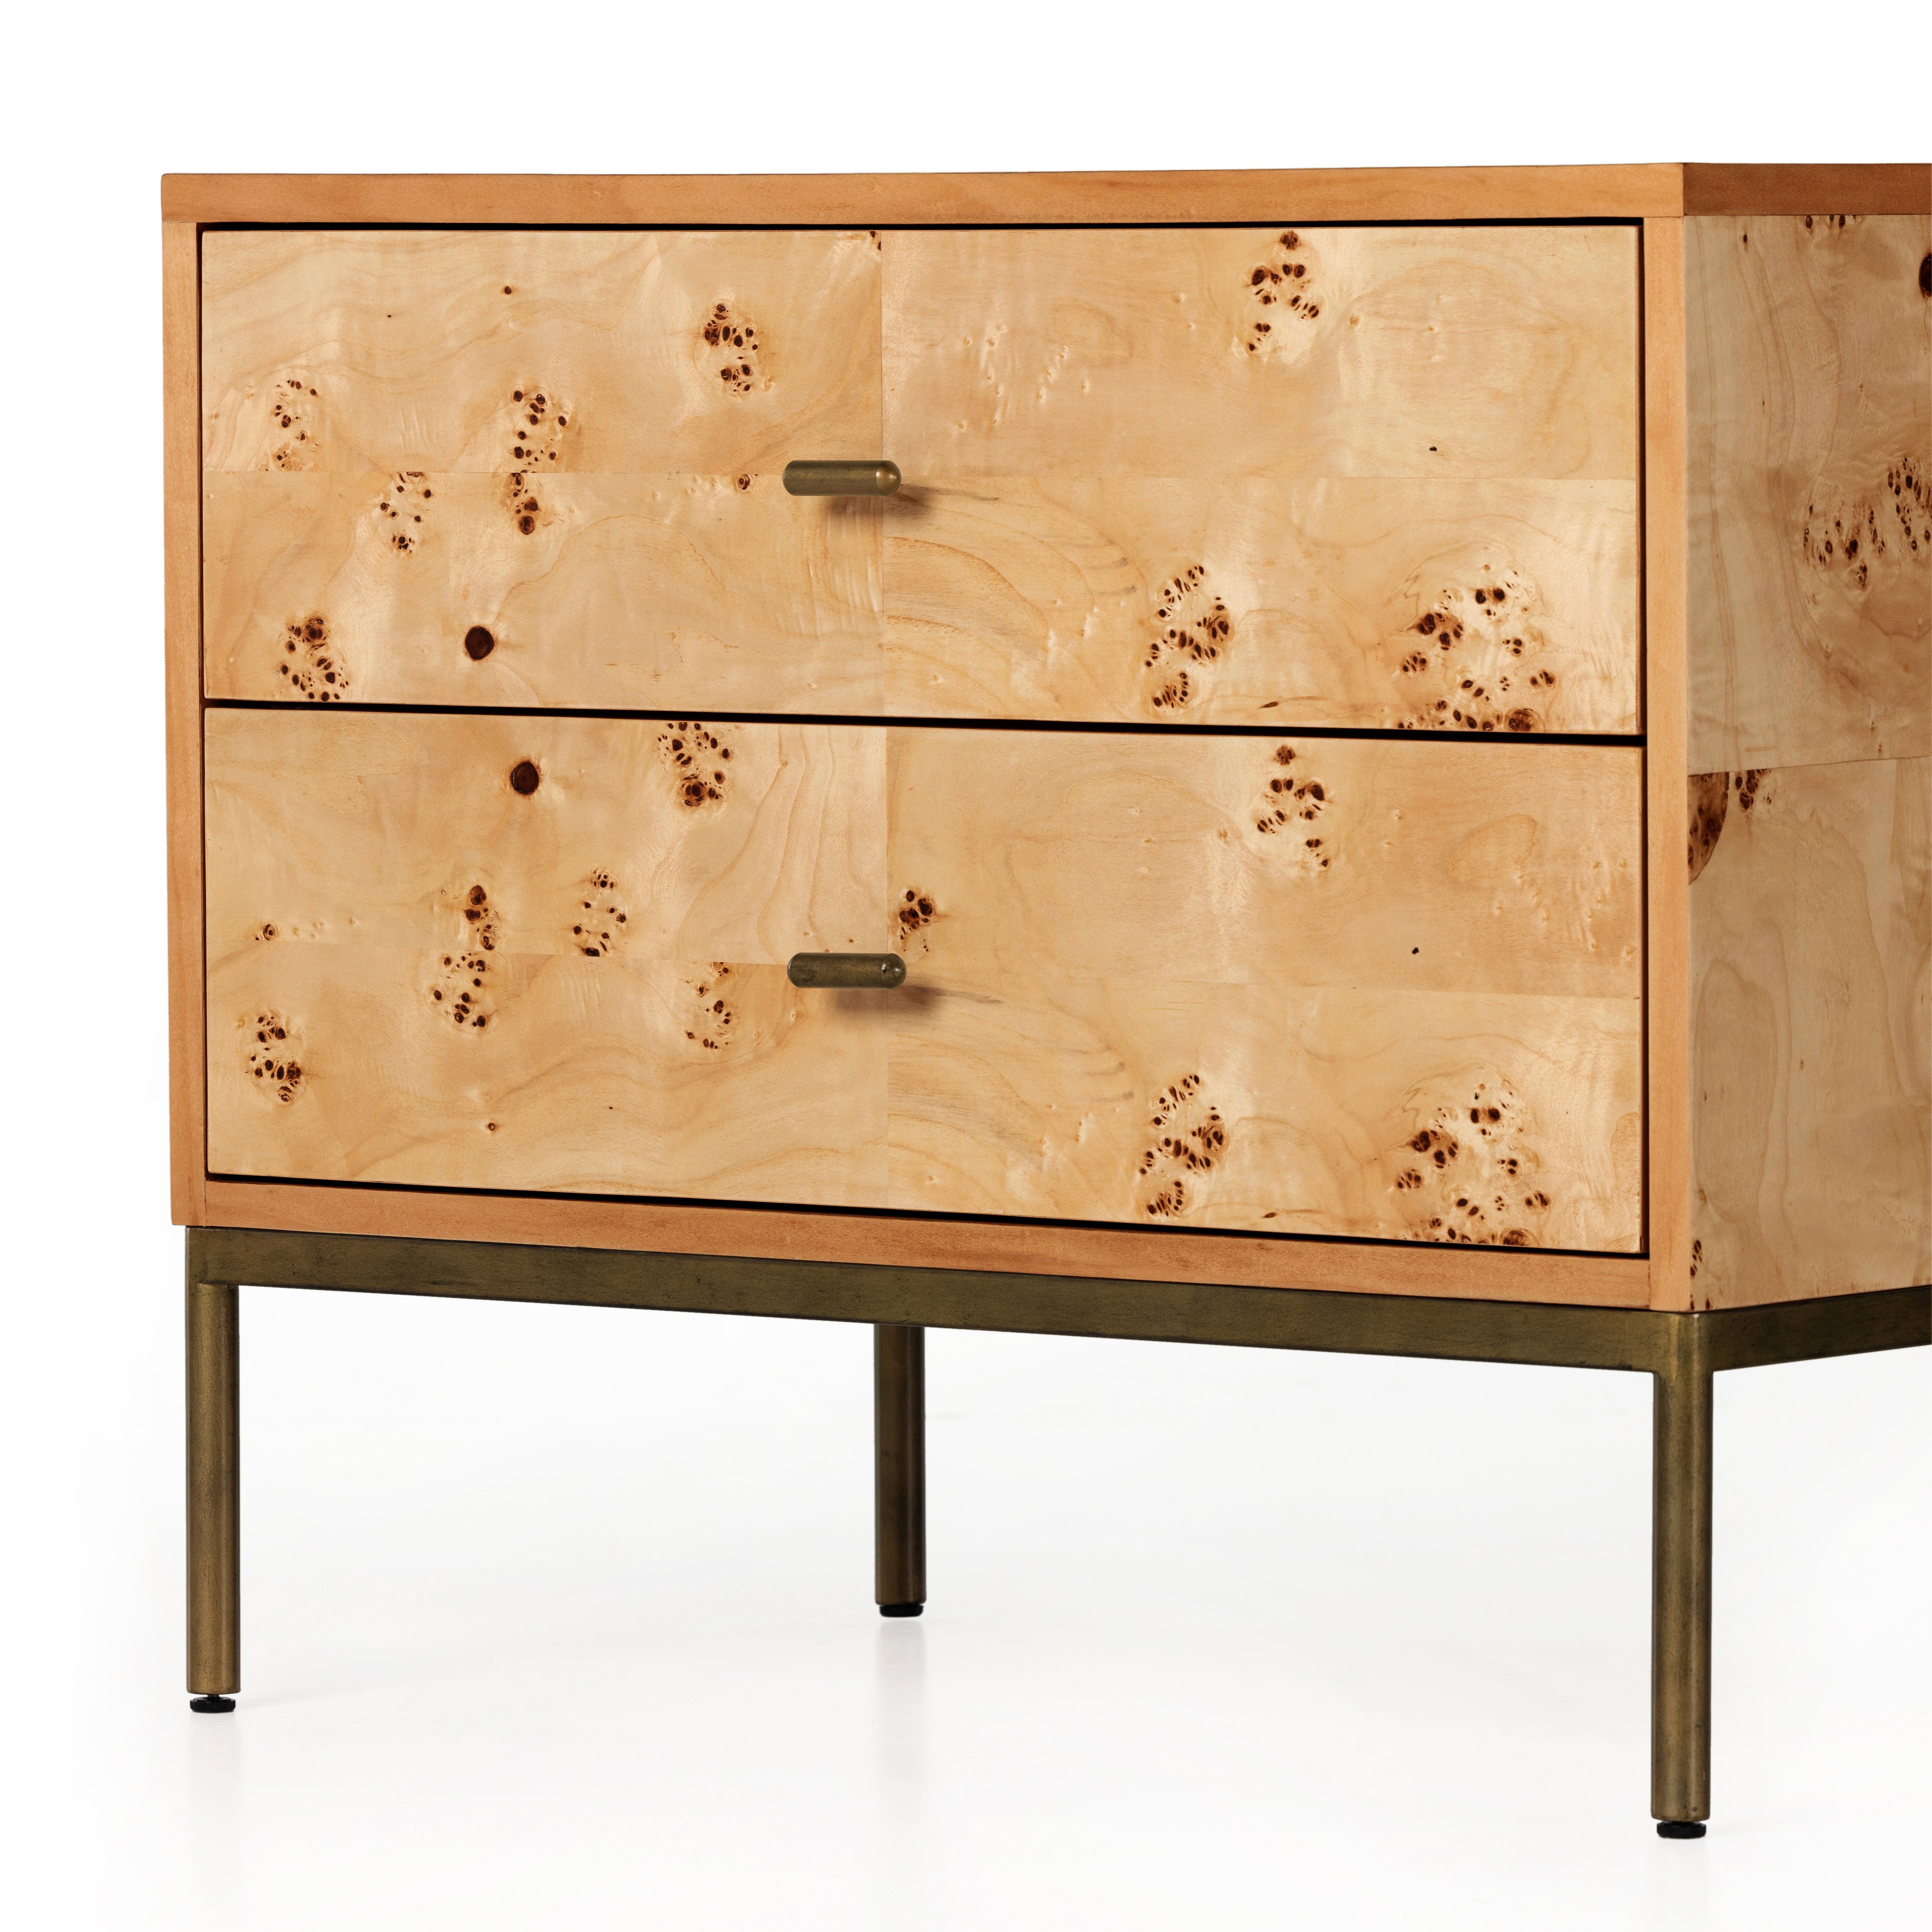 Made from poplar burl veneer with natural knots and graining, a dual-drawer nightstand brings extra storage space to the bedside. Slim brass-finished iron legs and hardware keep things looking light. Amethyst Home provides rugs, furniture, home decor, and lighting in the Houston metro area!